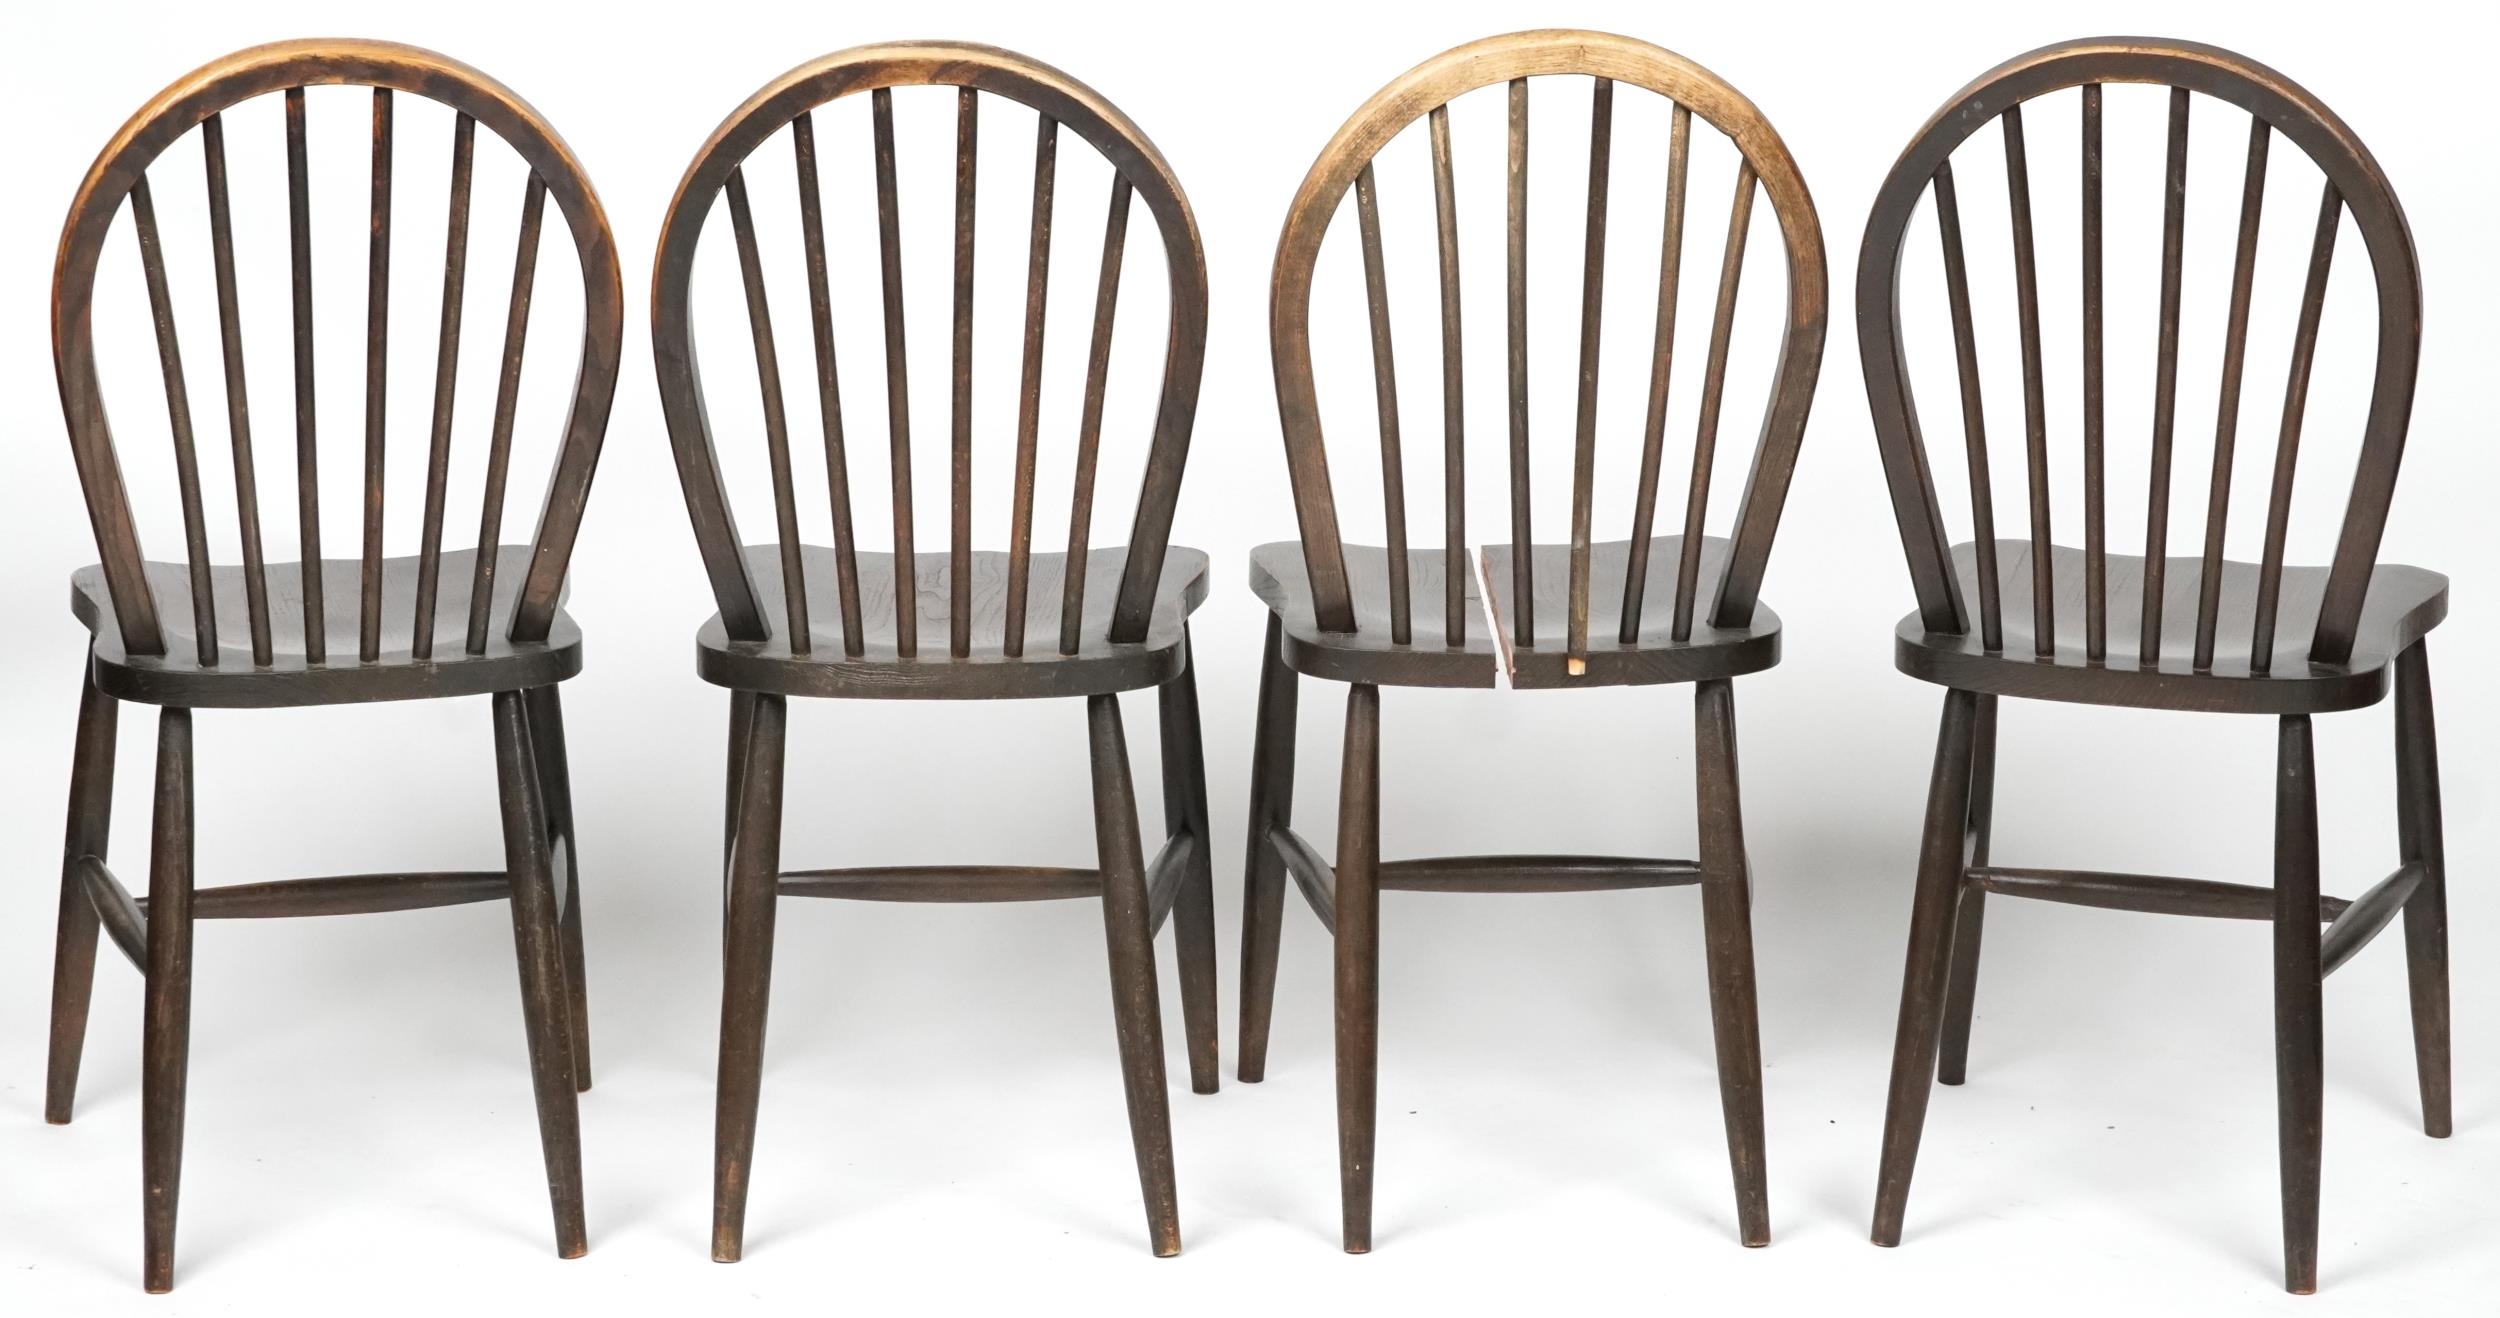 Set of four Ercol elm stick back chairs, each 90cm high - Image 3 of 4